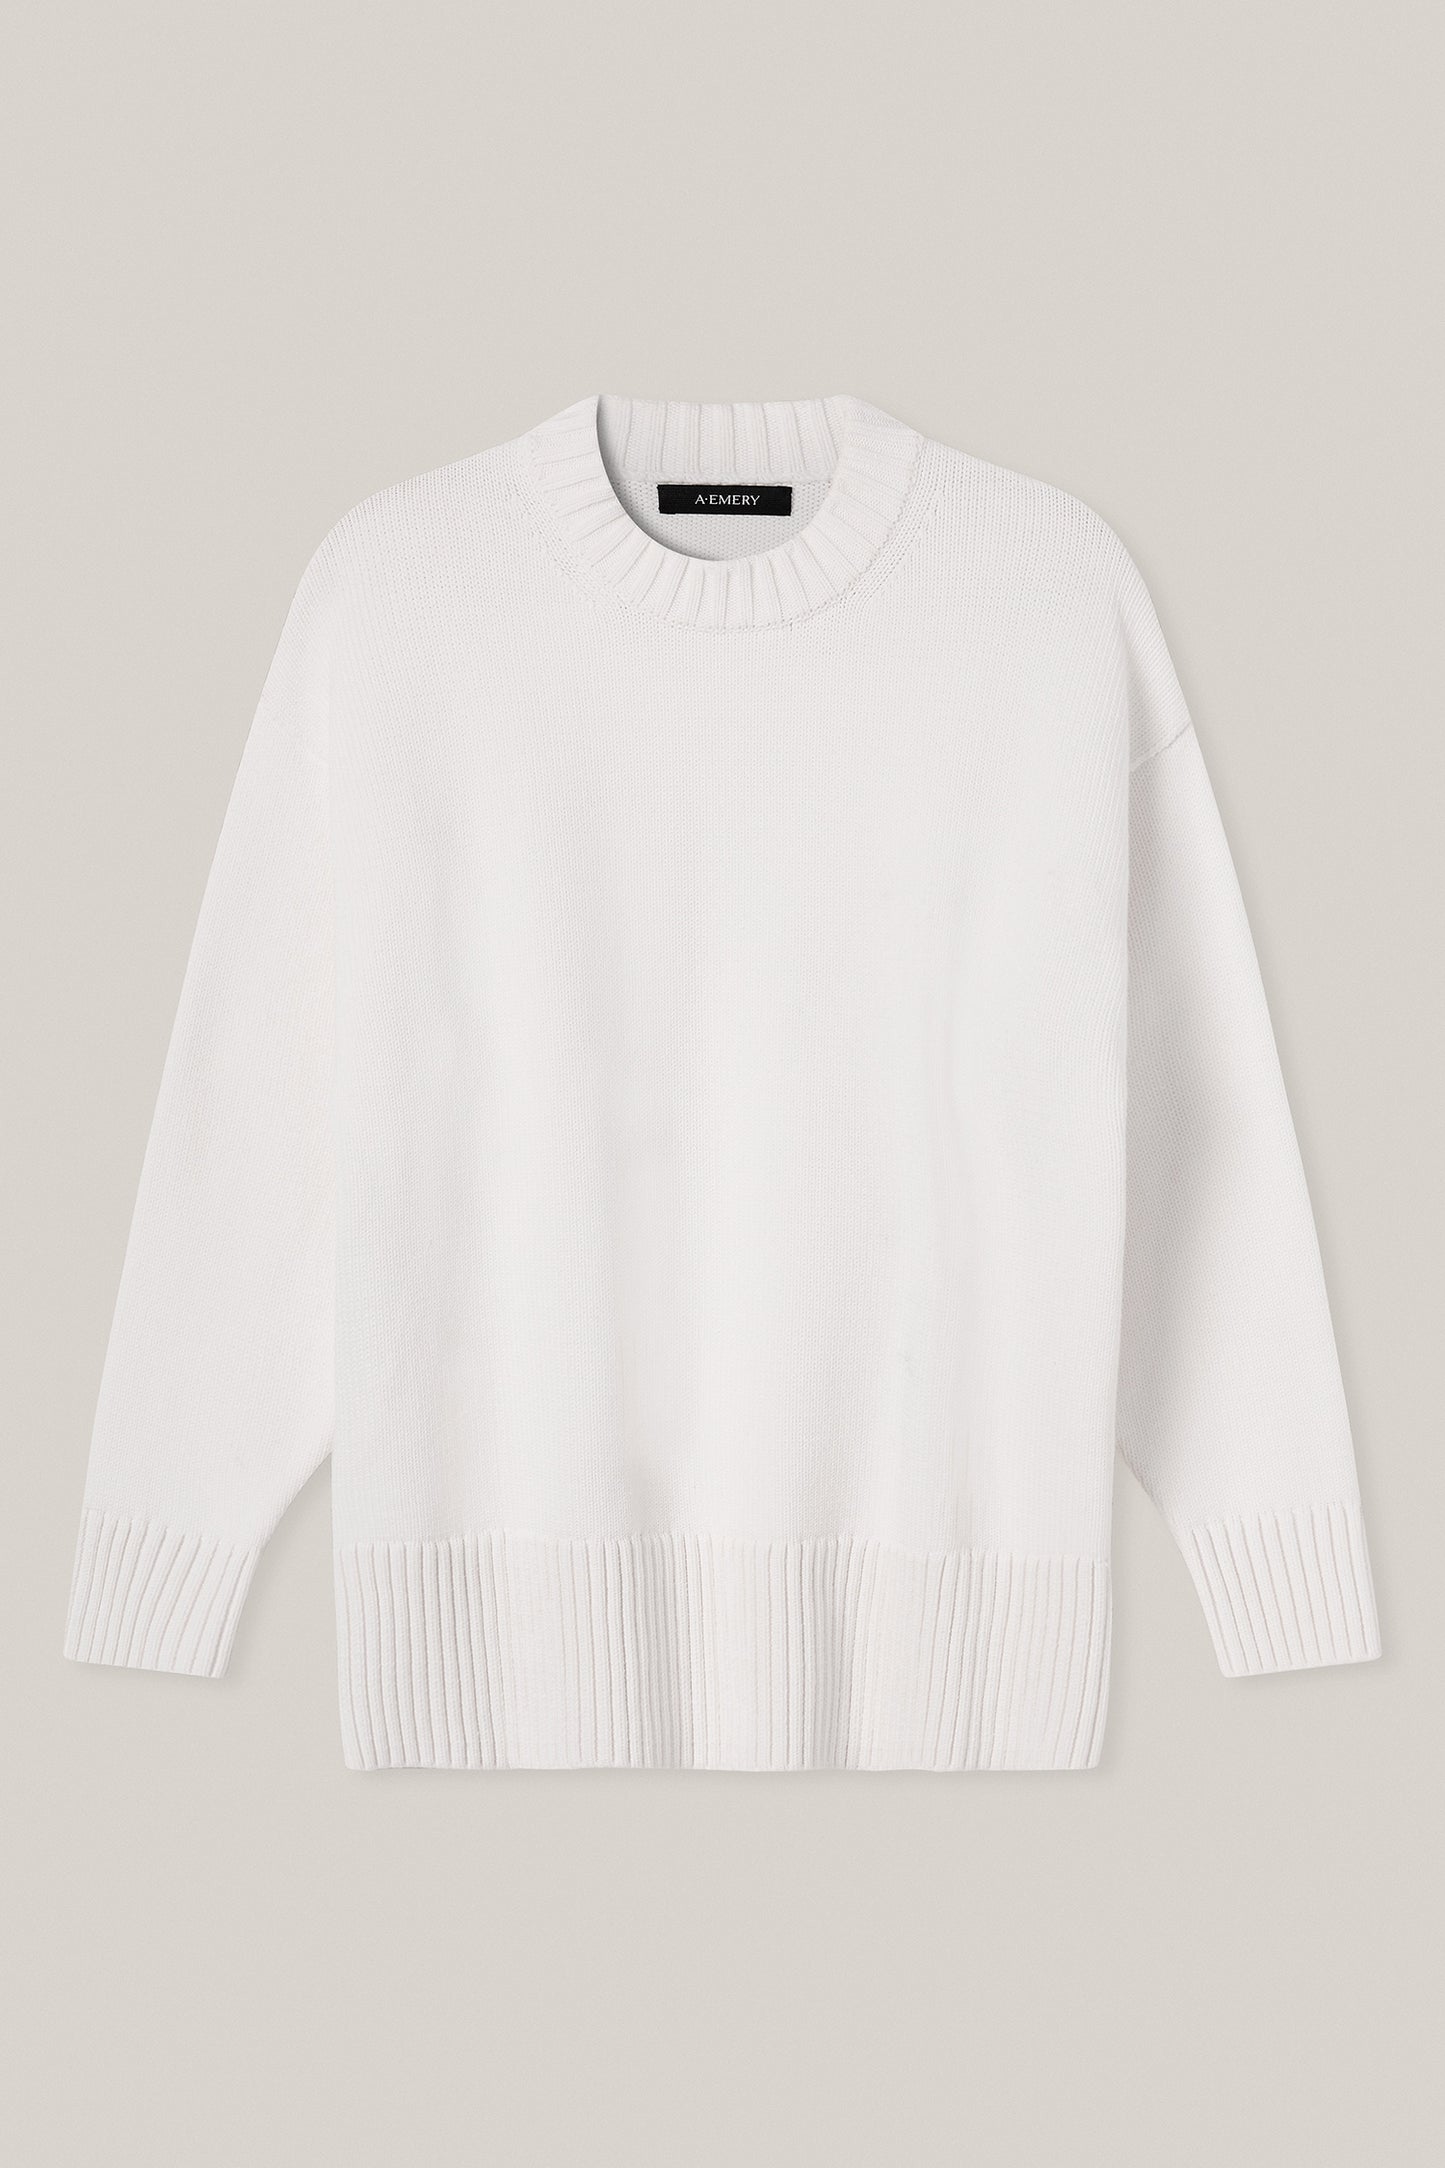 The Orson Knit